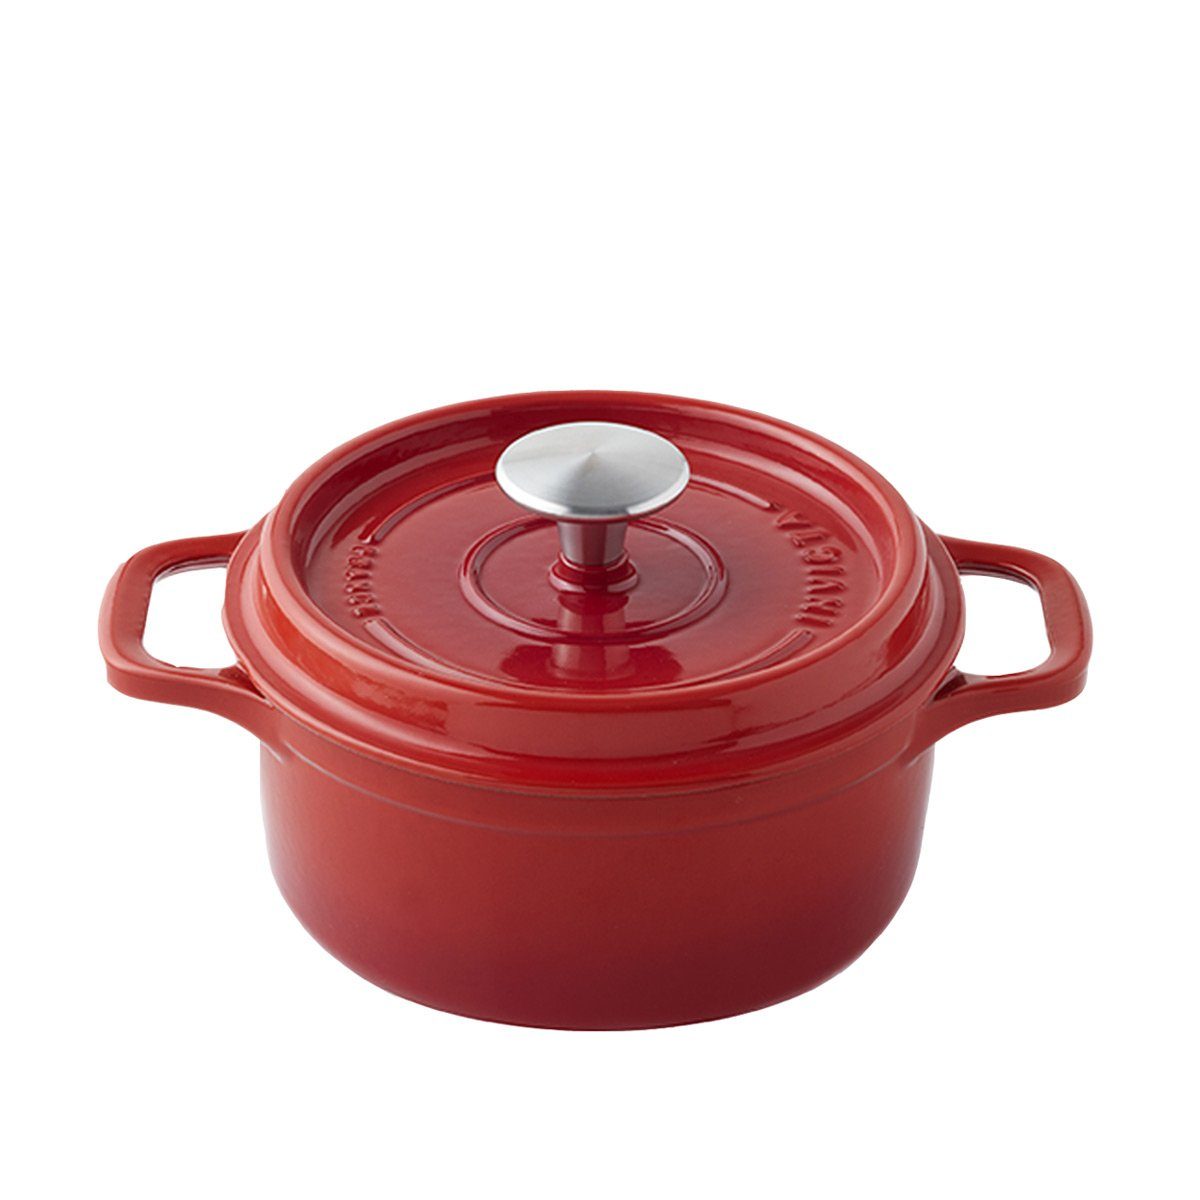 Invicta Bräter Cocottes, Cocotte rund 26 cm / 5 L - Gusseisen rot